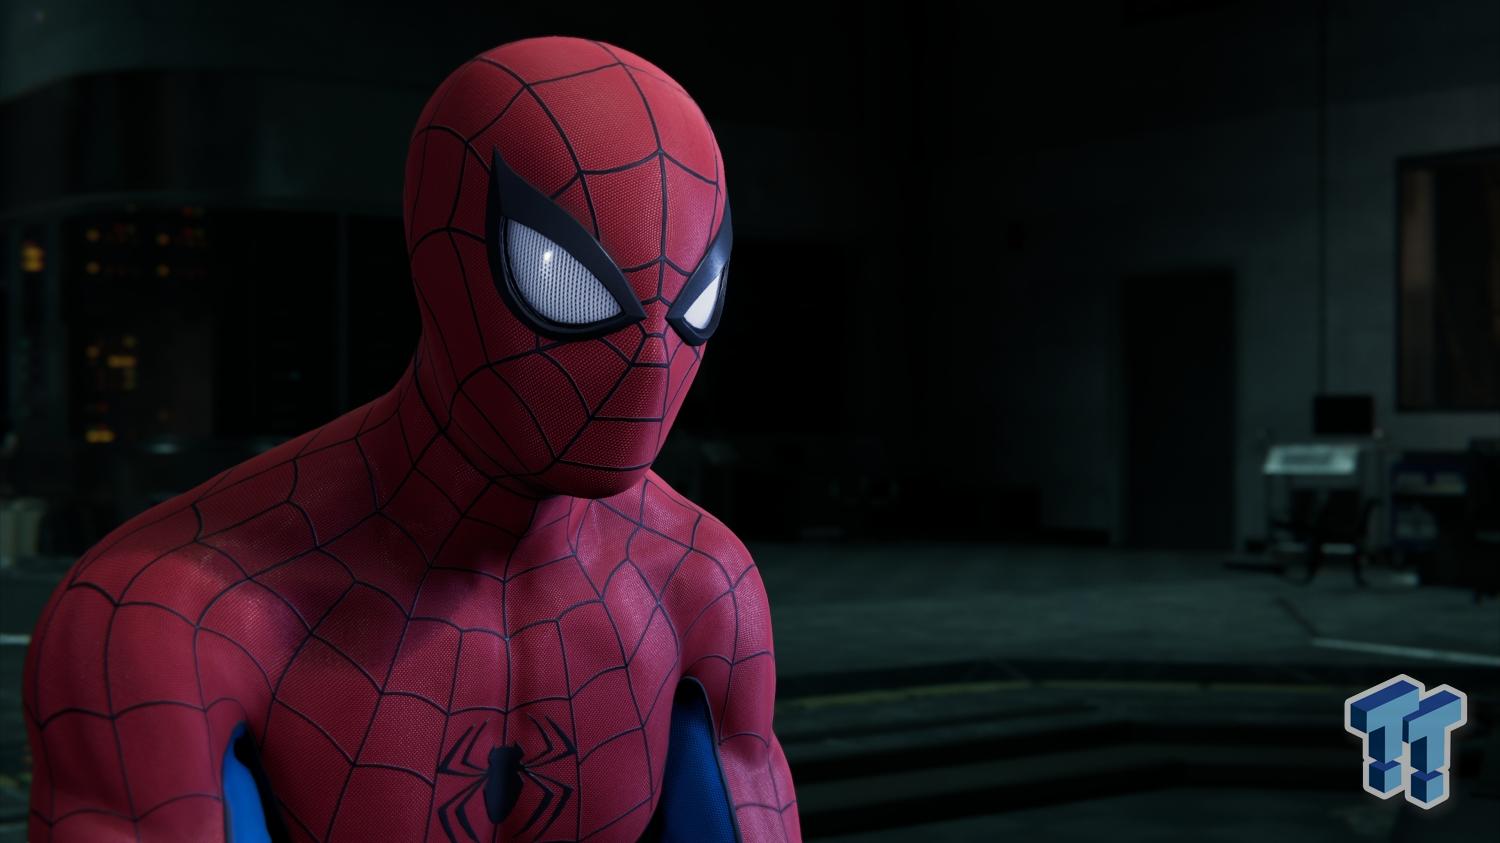 Marvel's Spider-Man (PC) Review: With Great Power Comes Great DLSS